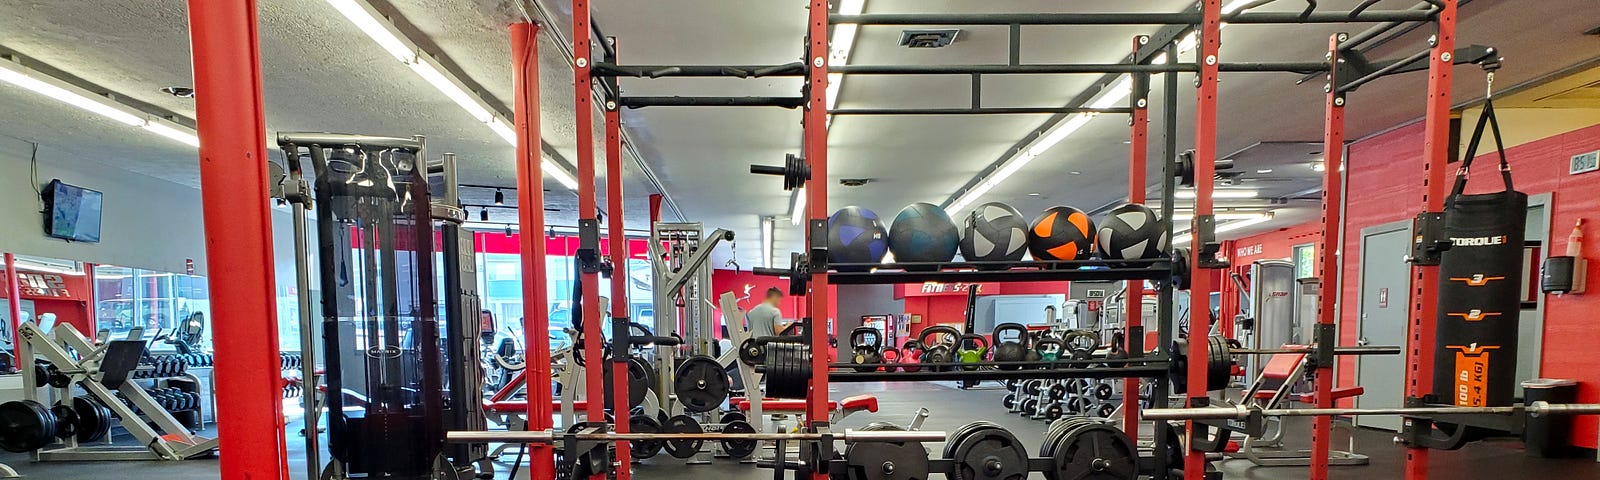 Brightly lit gym with weight equipment and machines.